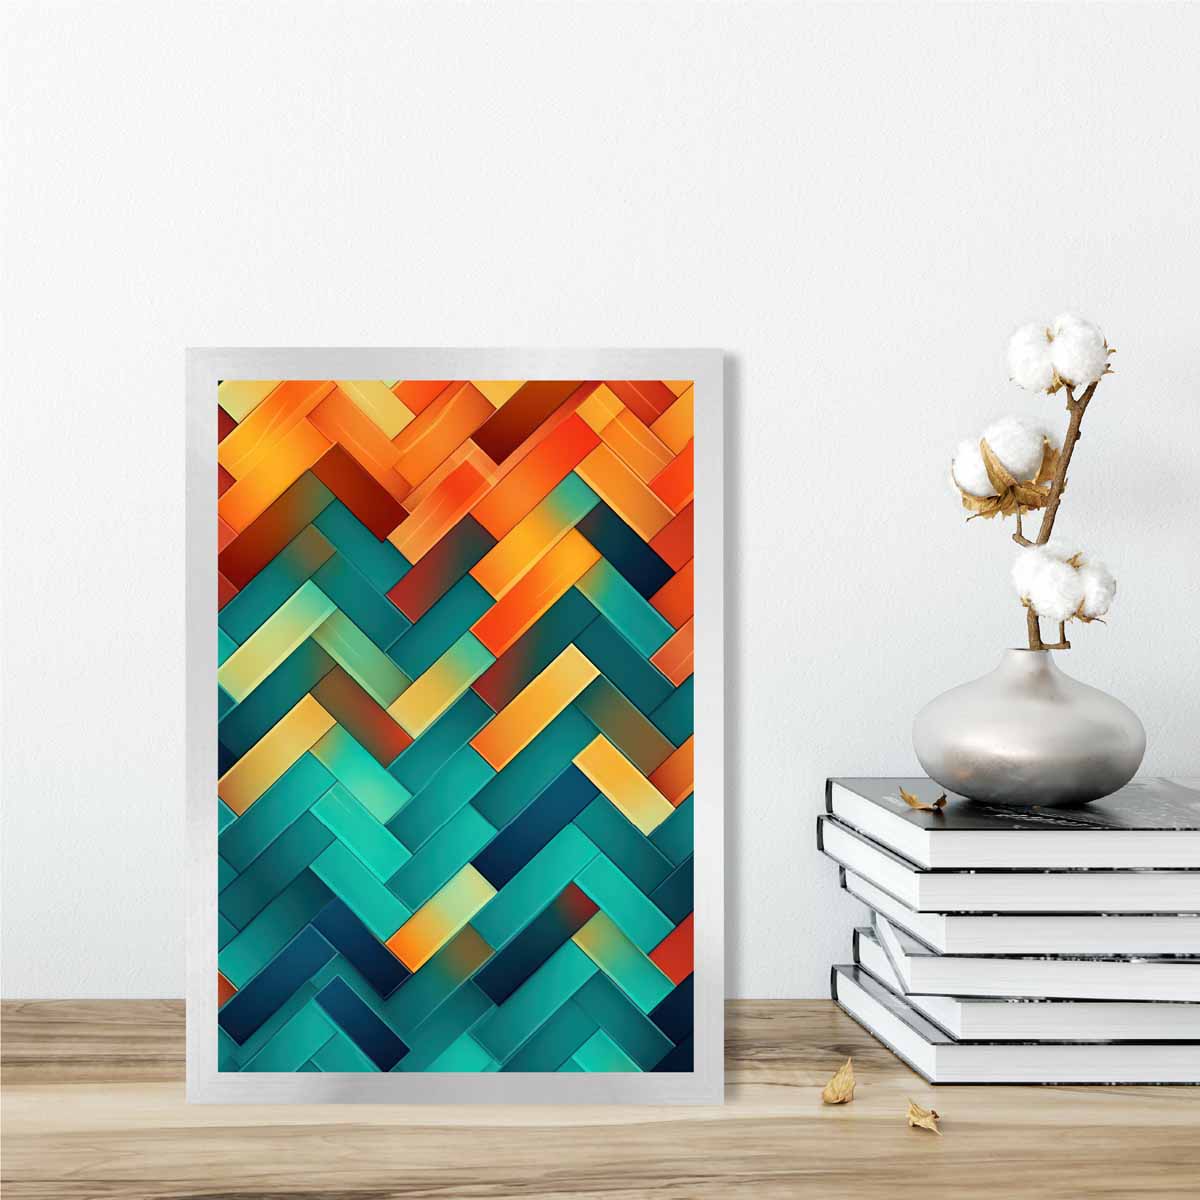 Abstract Geometric Shapes Art Print Teal Blue Orange and Red No 2